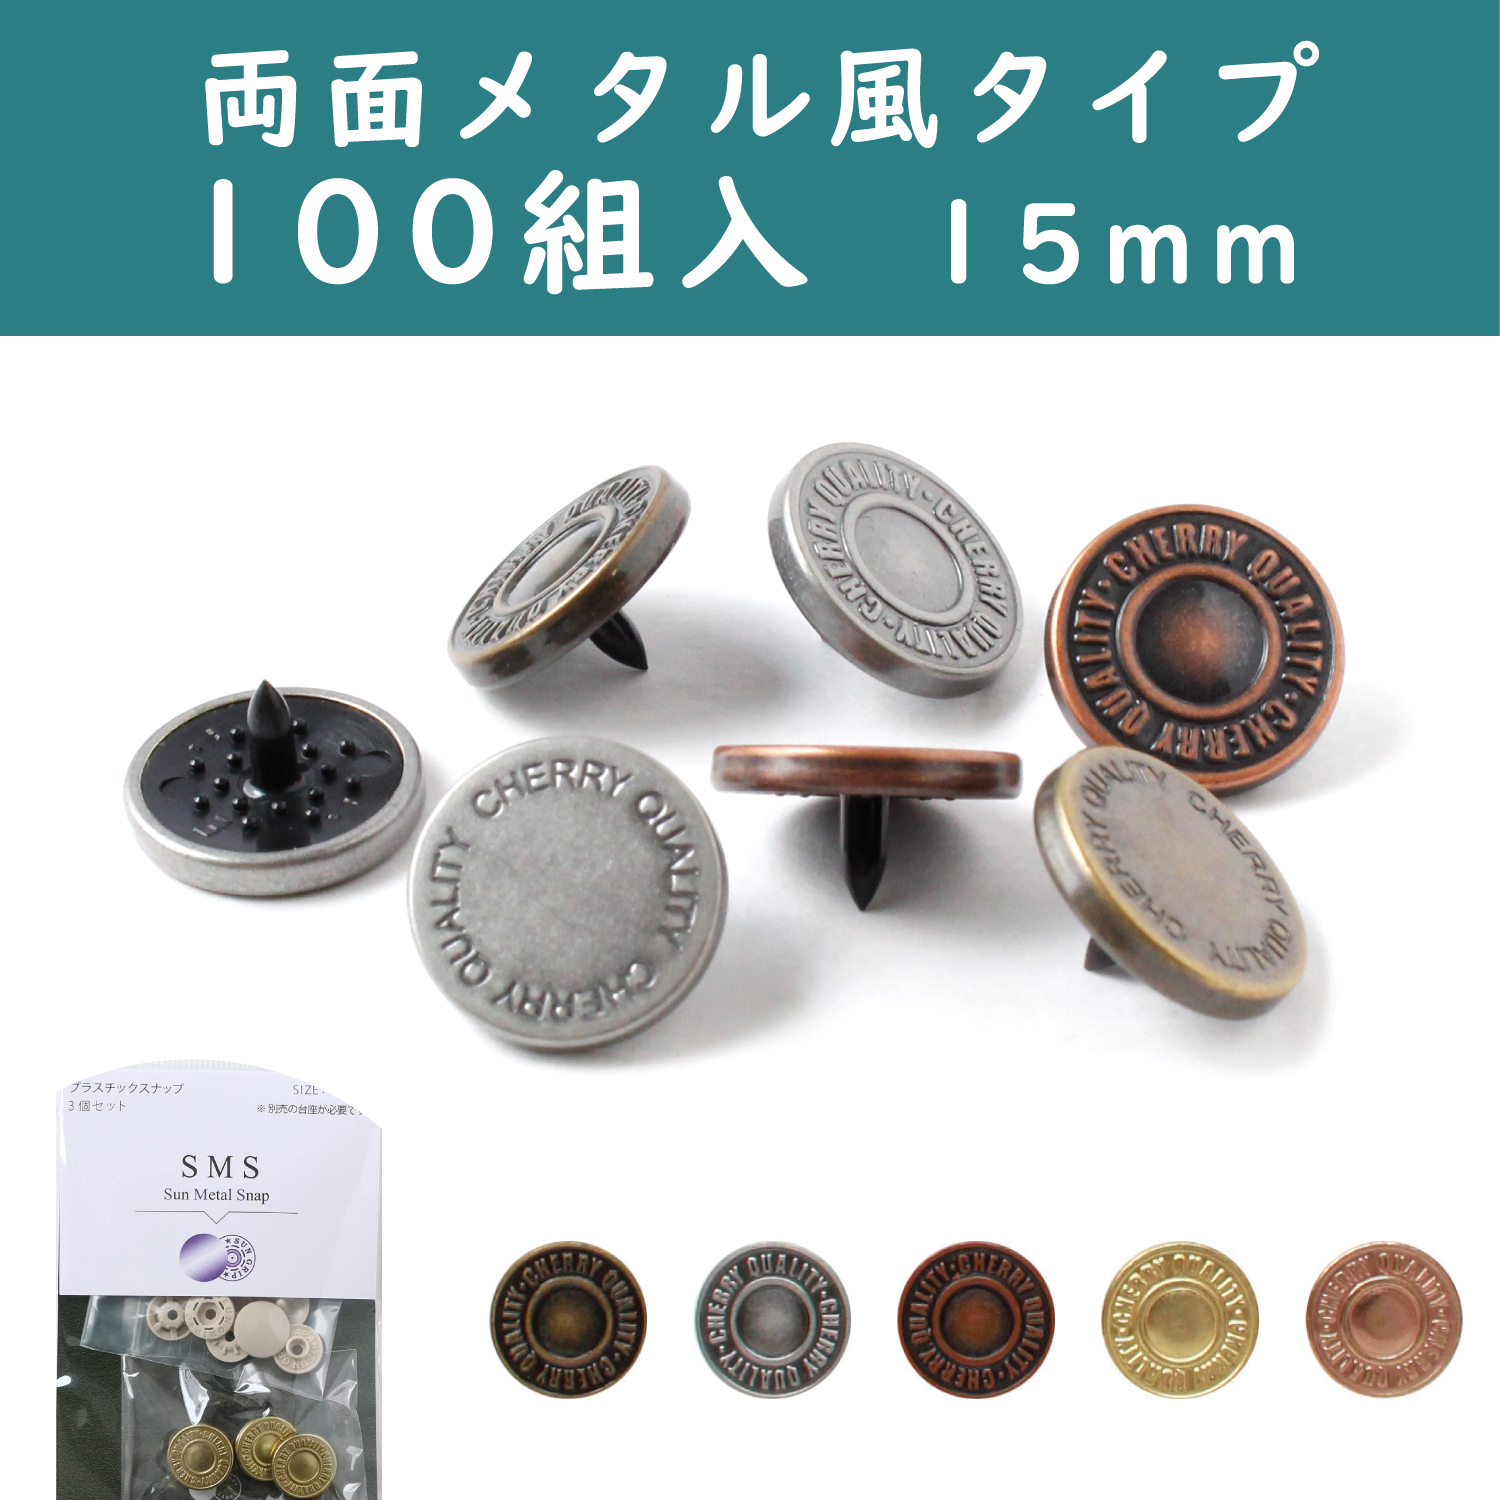 SMS15-1-100 SUN METAL SNAP, Metal-like Snap Button　type1 15mm 100set (pack)